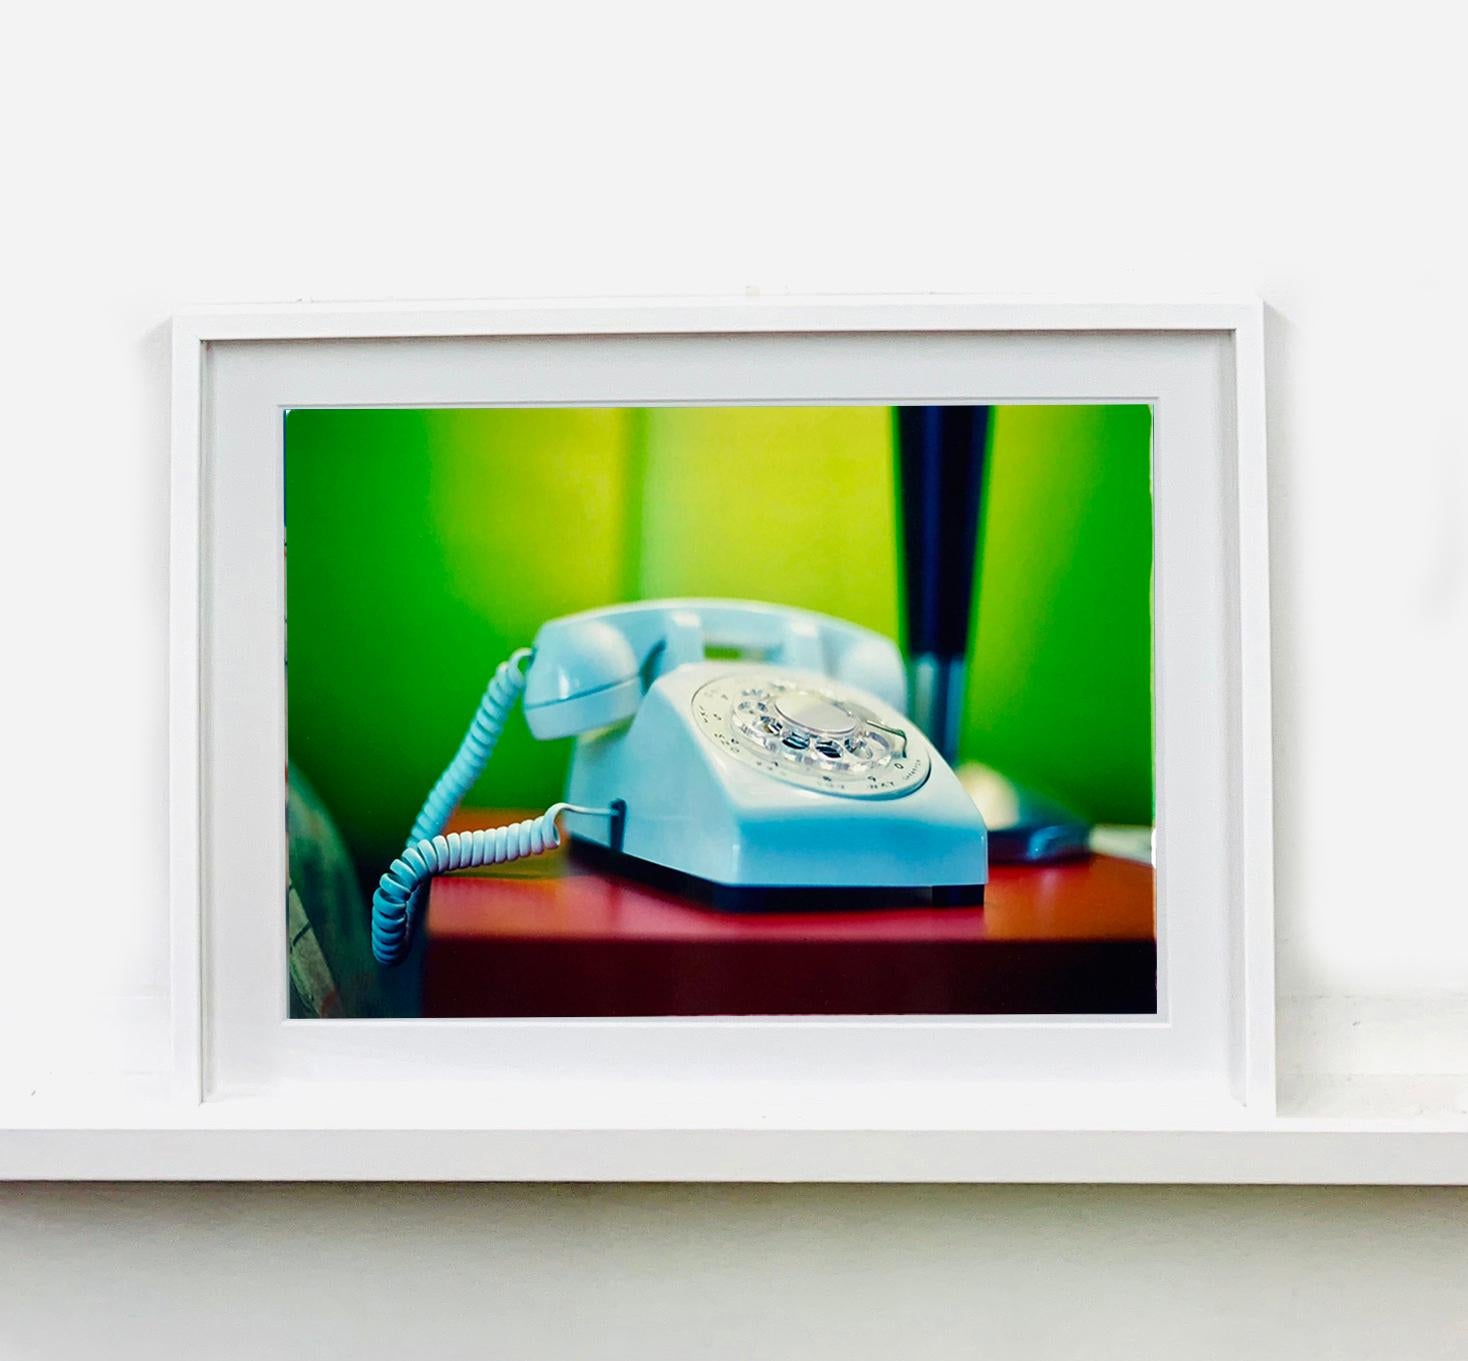 'Telephone VII' part of Richard Heeps 'Dream in Colour' Series. 
This cool Palm Springs interior photography featuring a vintage telephone on a nightstand combines  bright contrasting green, red and blue color tones and dreamy nostalgic mid-century